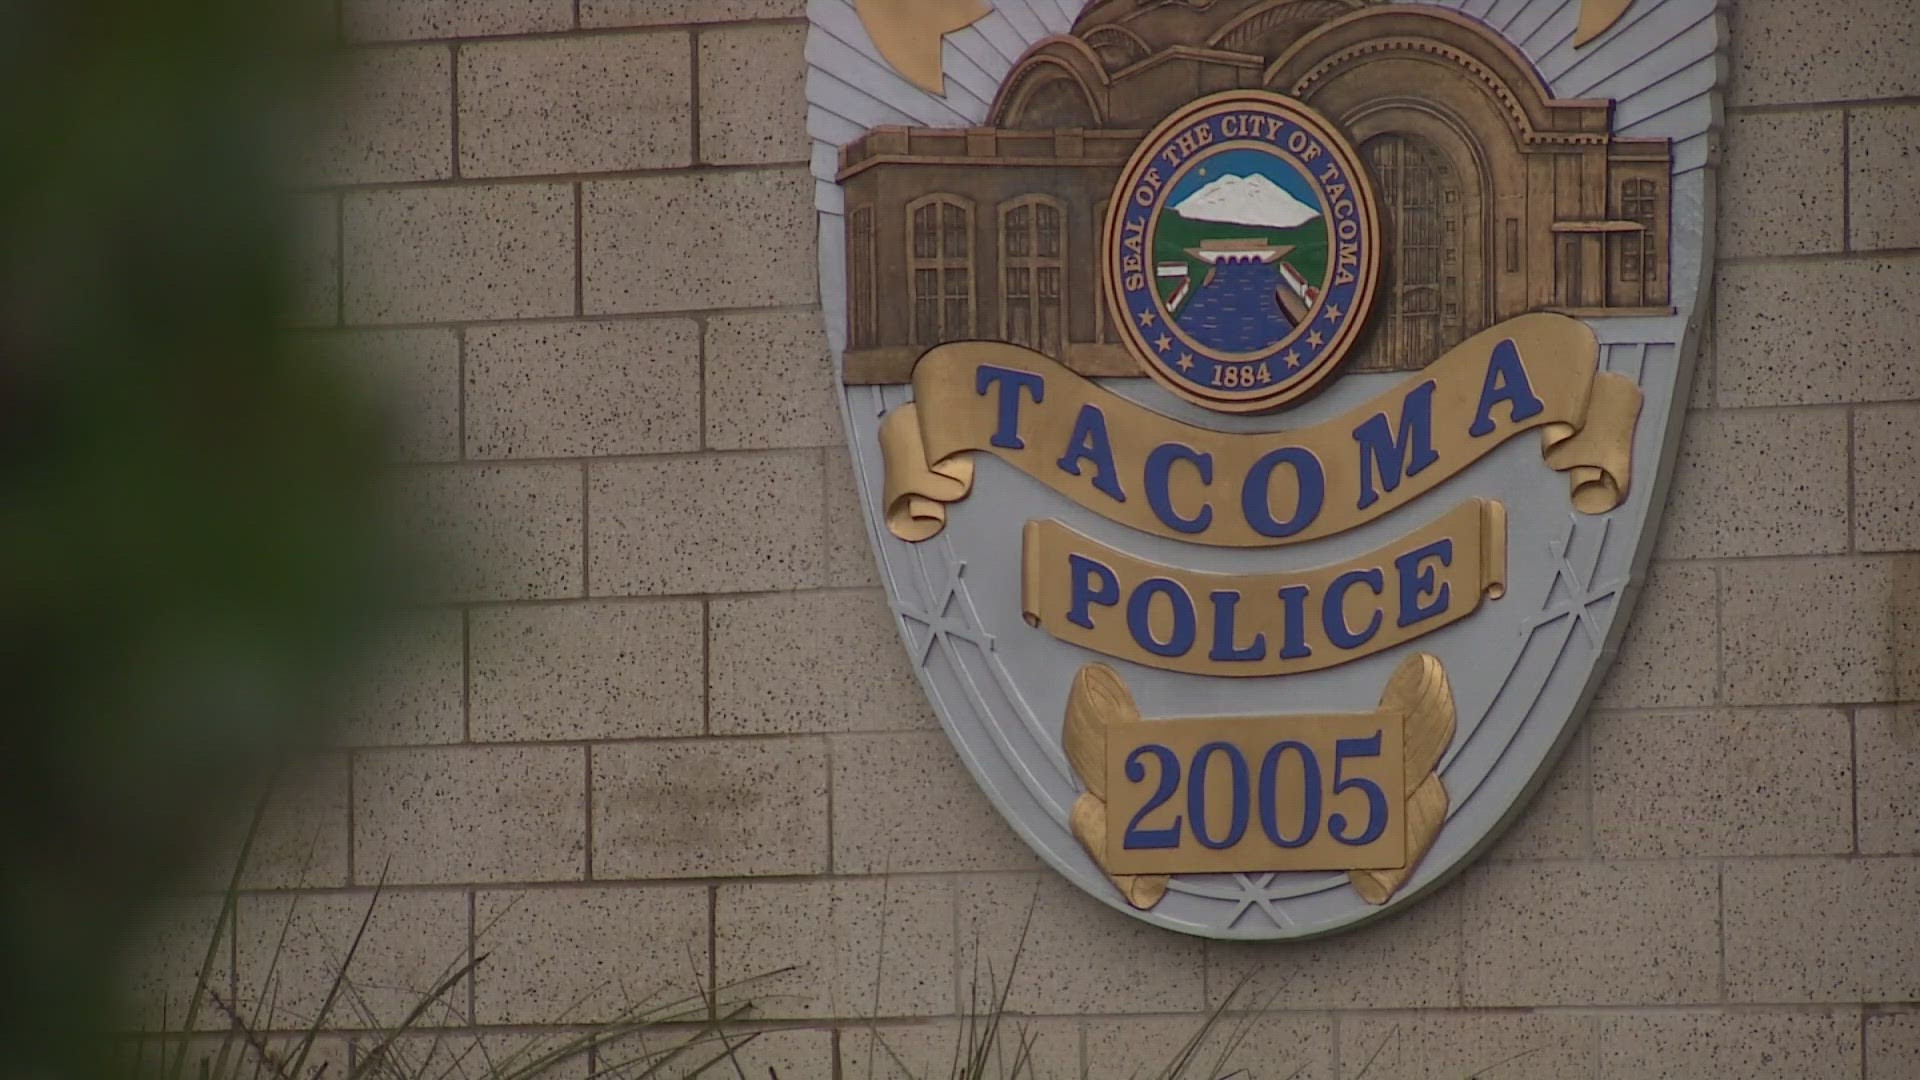 Transparency in policing continues to be a concern for the City of Tacoma, community members say.